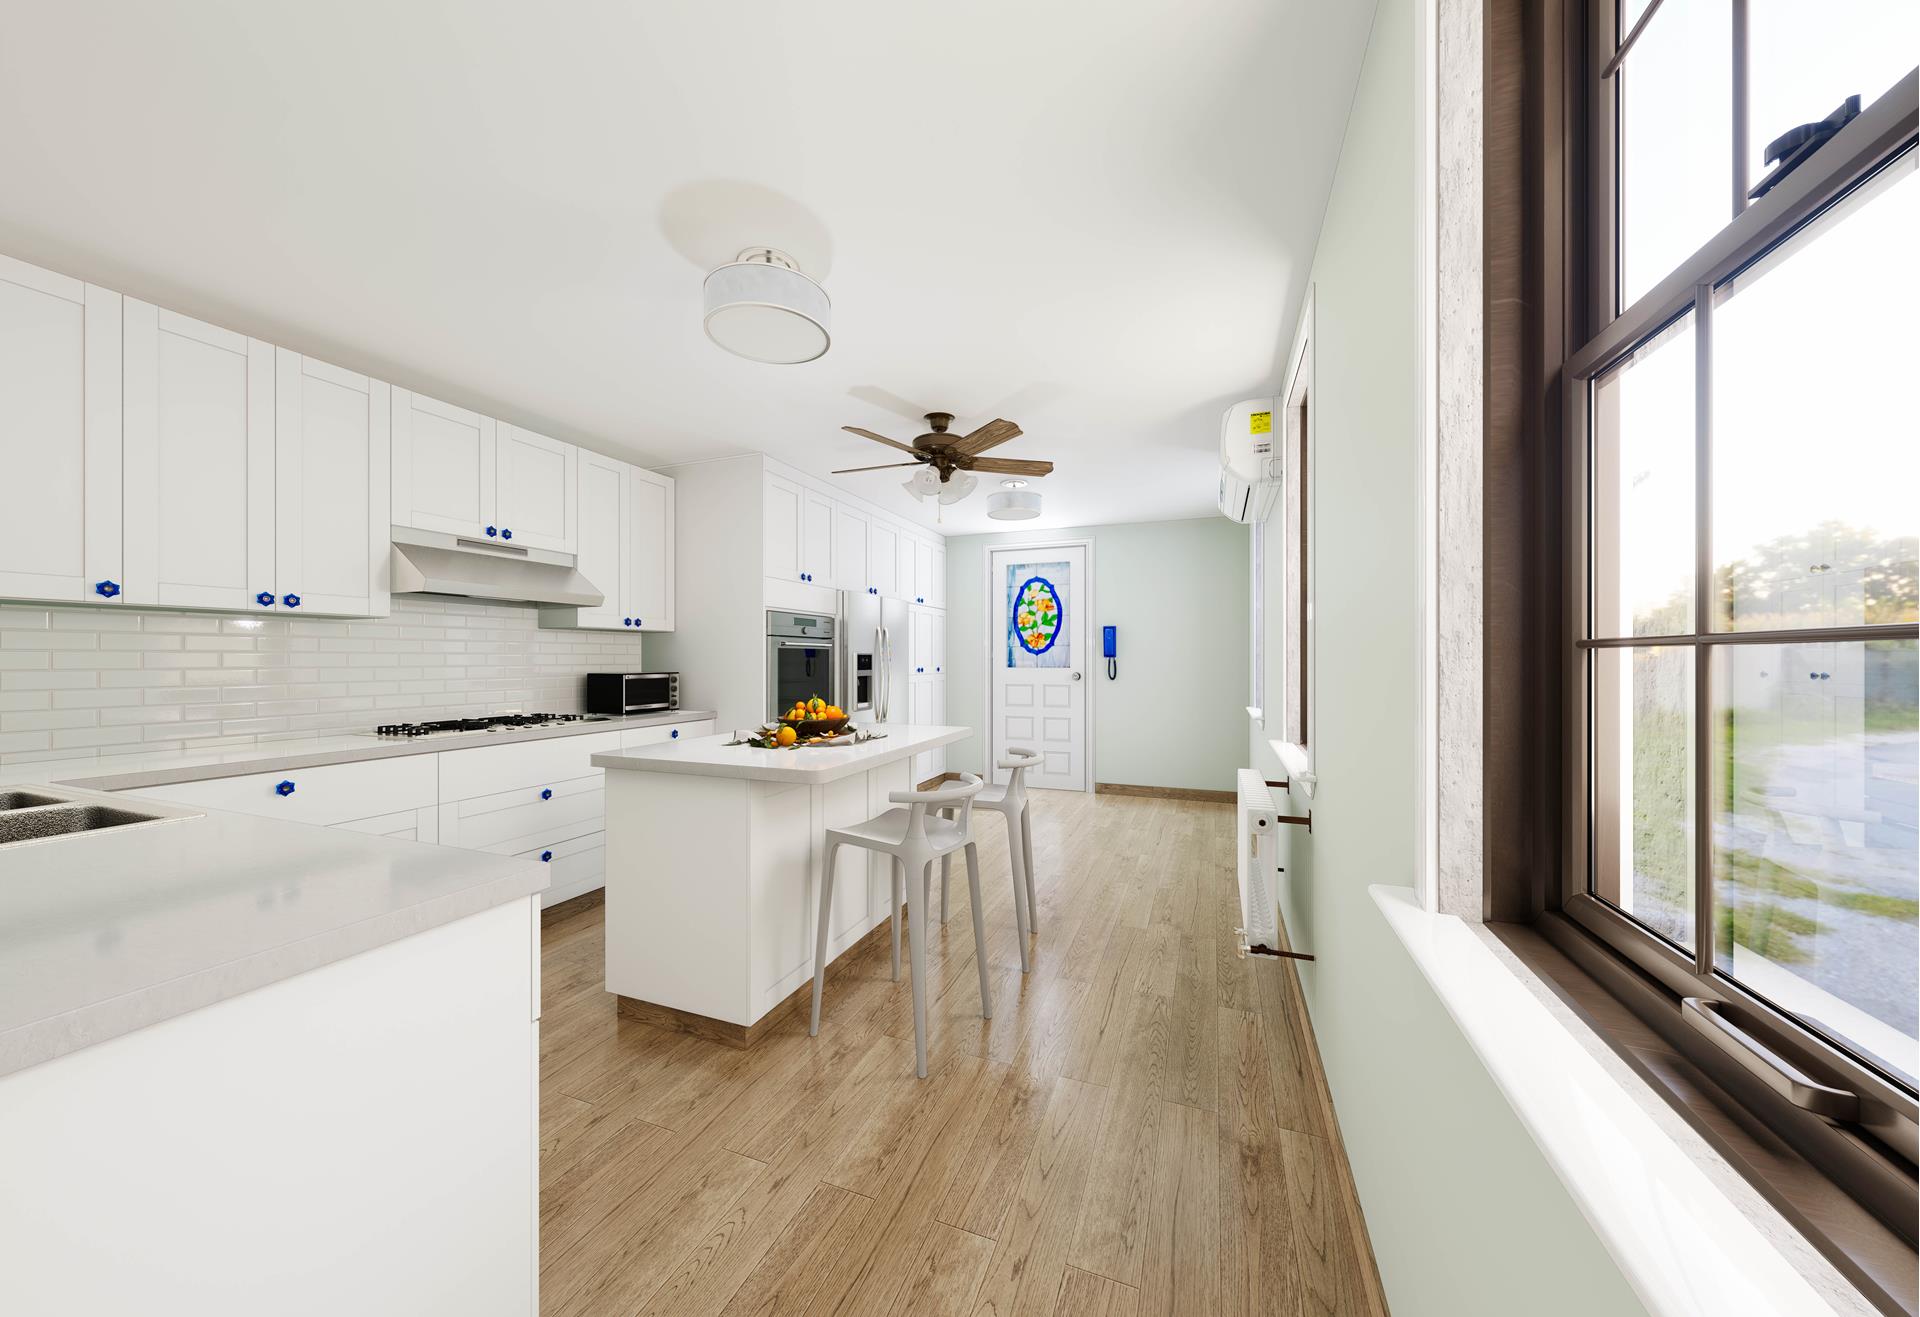 108 Withers Street, Williamsburg North, Brooklyn, New York - 3 Bedrooms  
2.5 Bathrooms  
7 Rooms - 